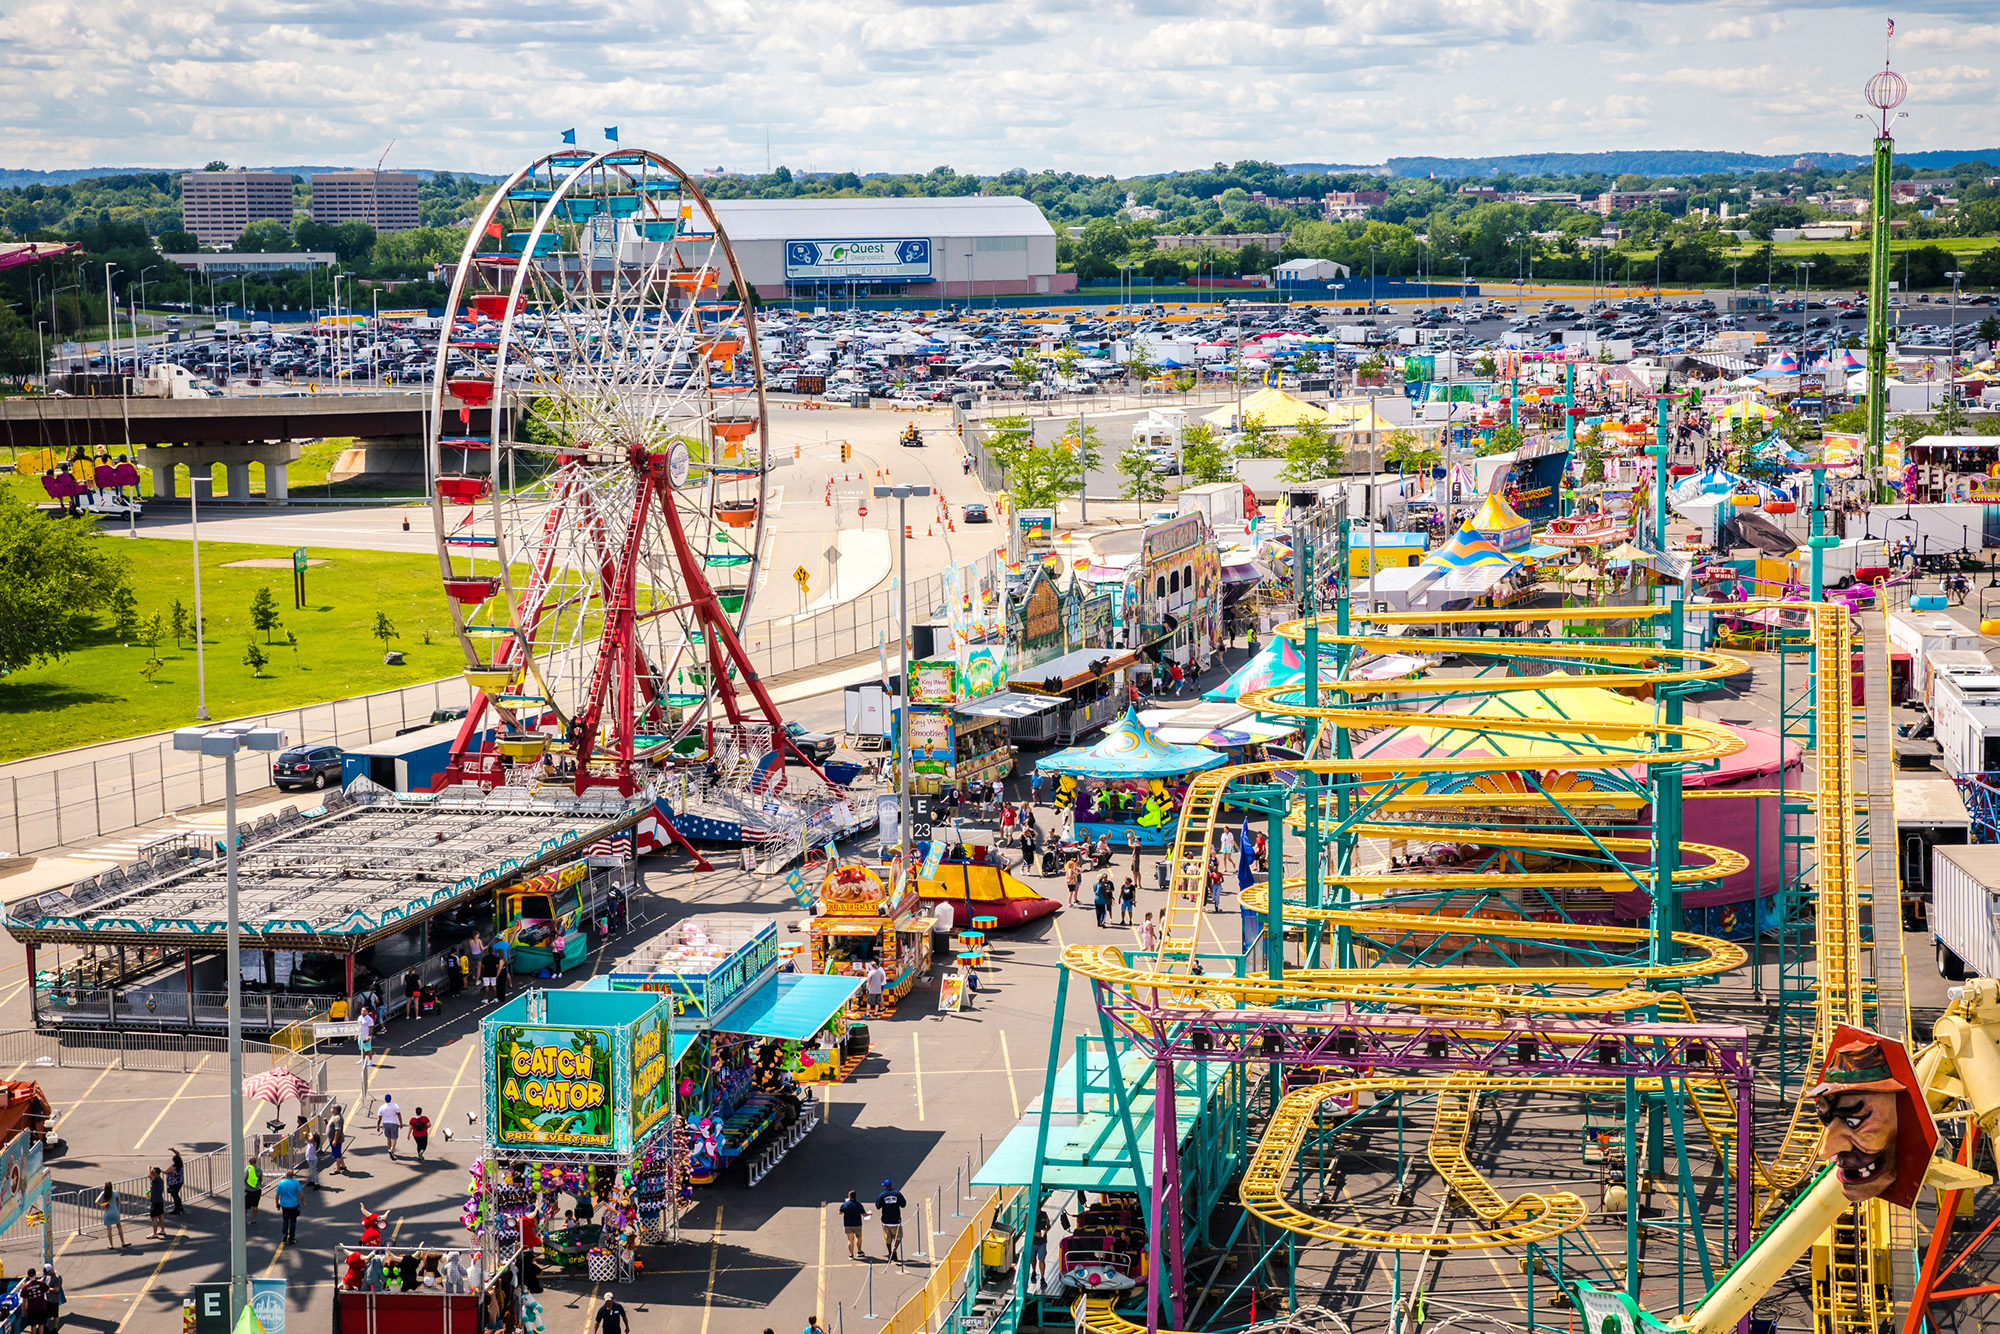 Image Assets State Fair Meadowlands